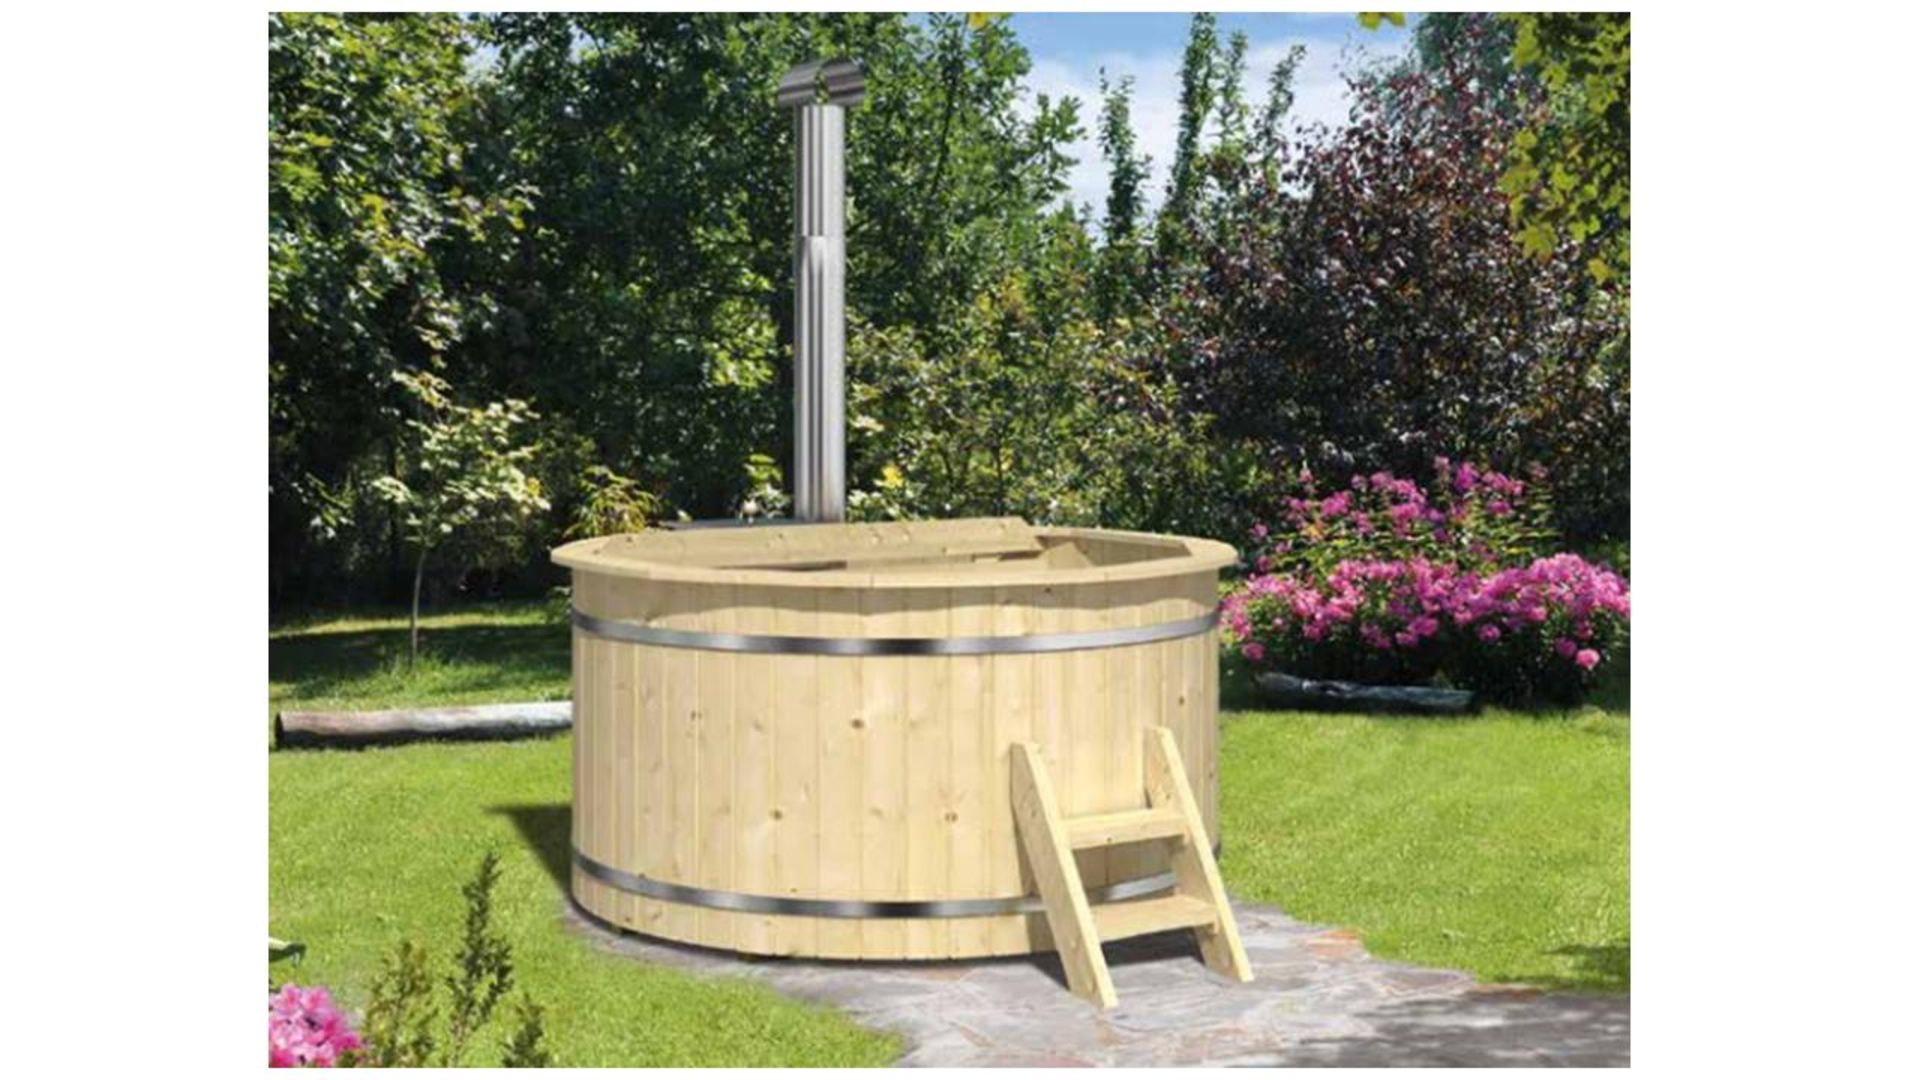 + VAT Brand New Spruce Wooden Hot Tub- 4/6 Person - 105cm Tall - 42mm Thickness - Internal Heater -